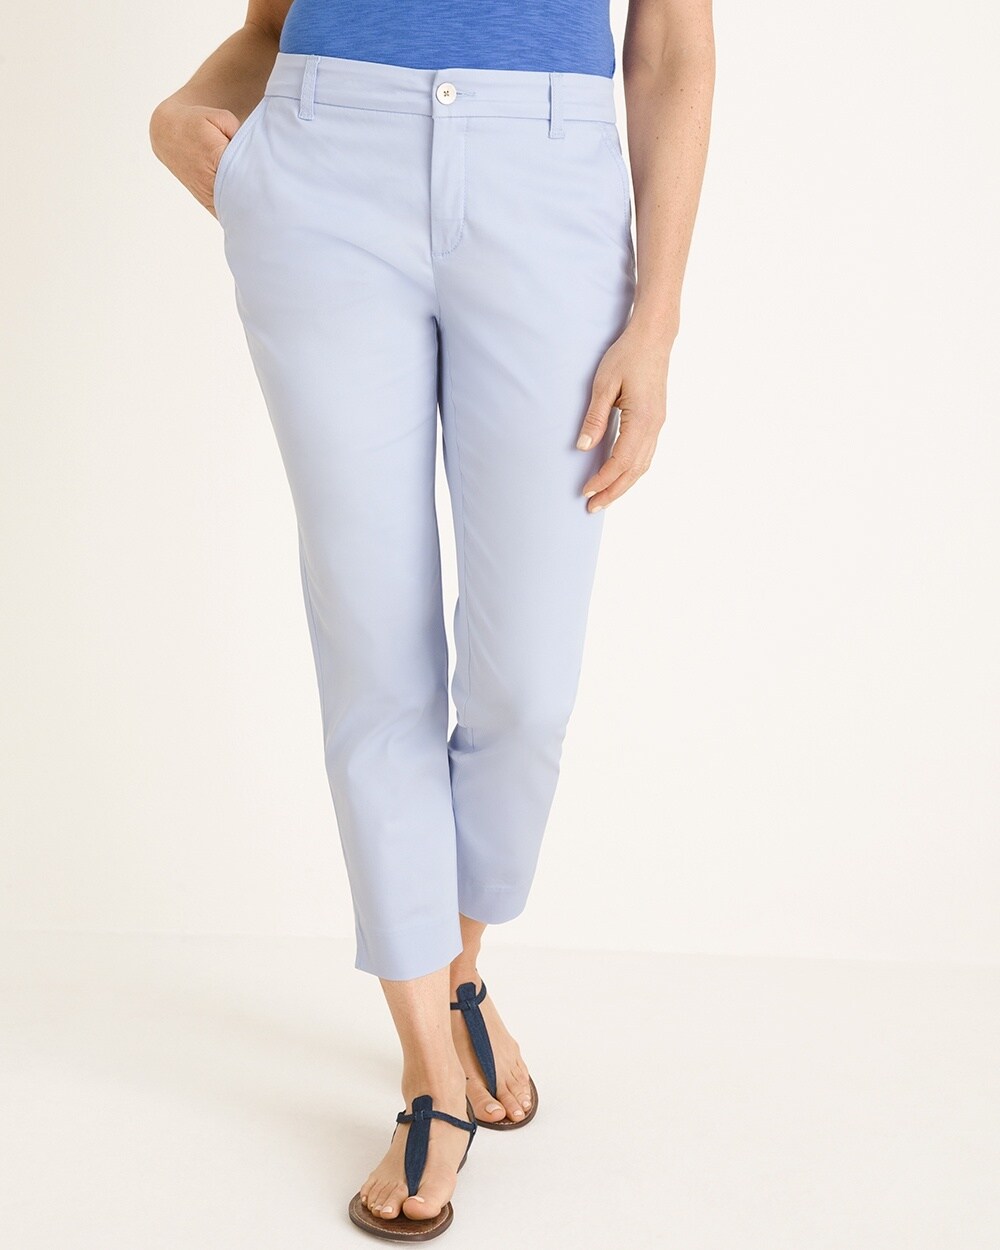 Polished Chino Ankle Pants